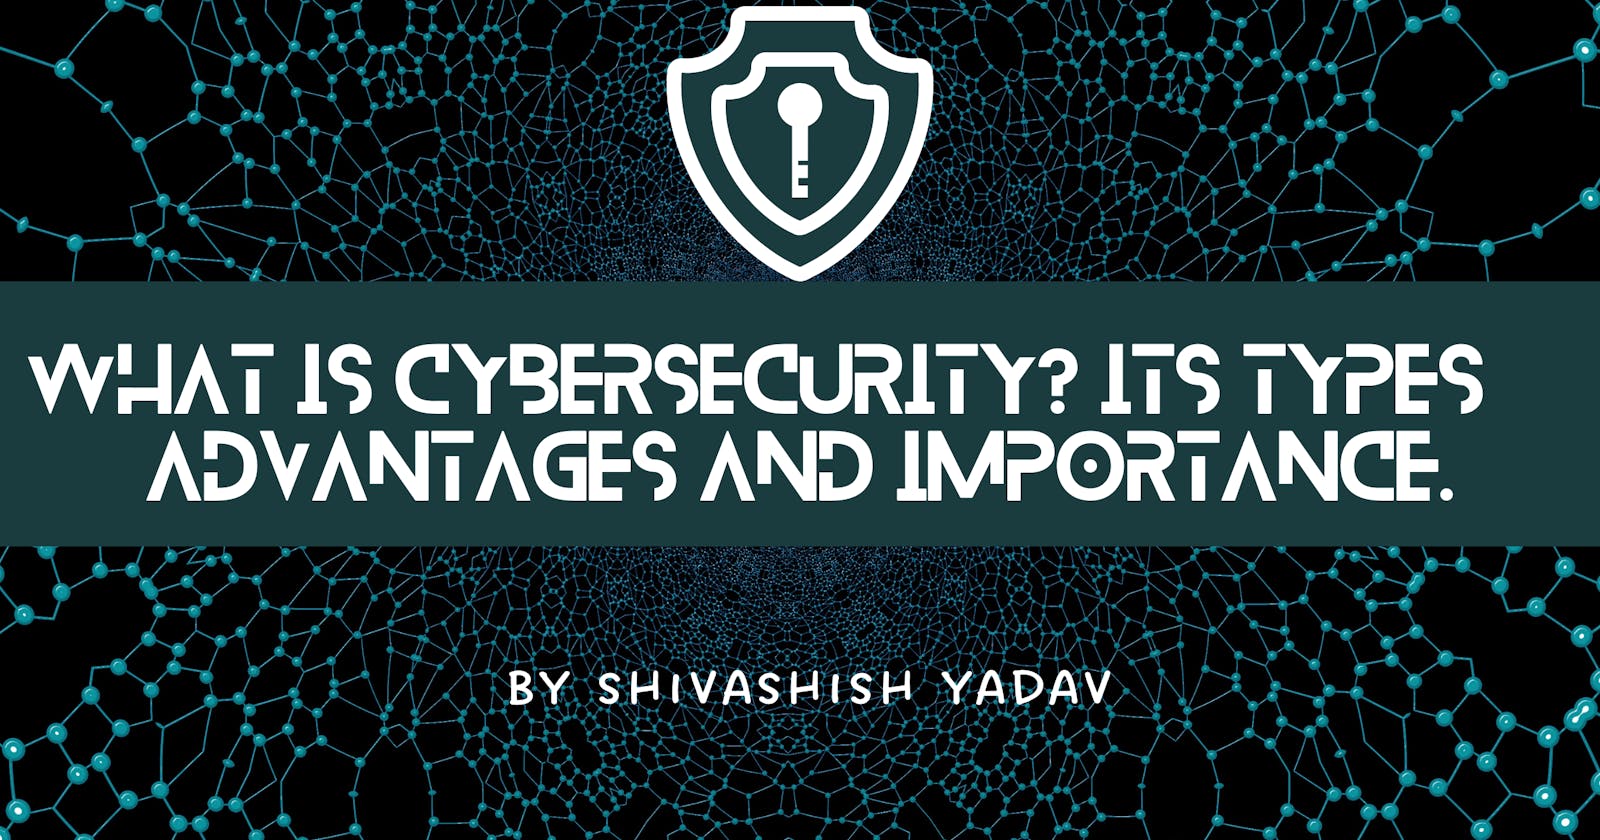 What is Cybersecurity? Its types, advantages and importance.